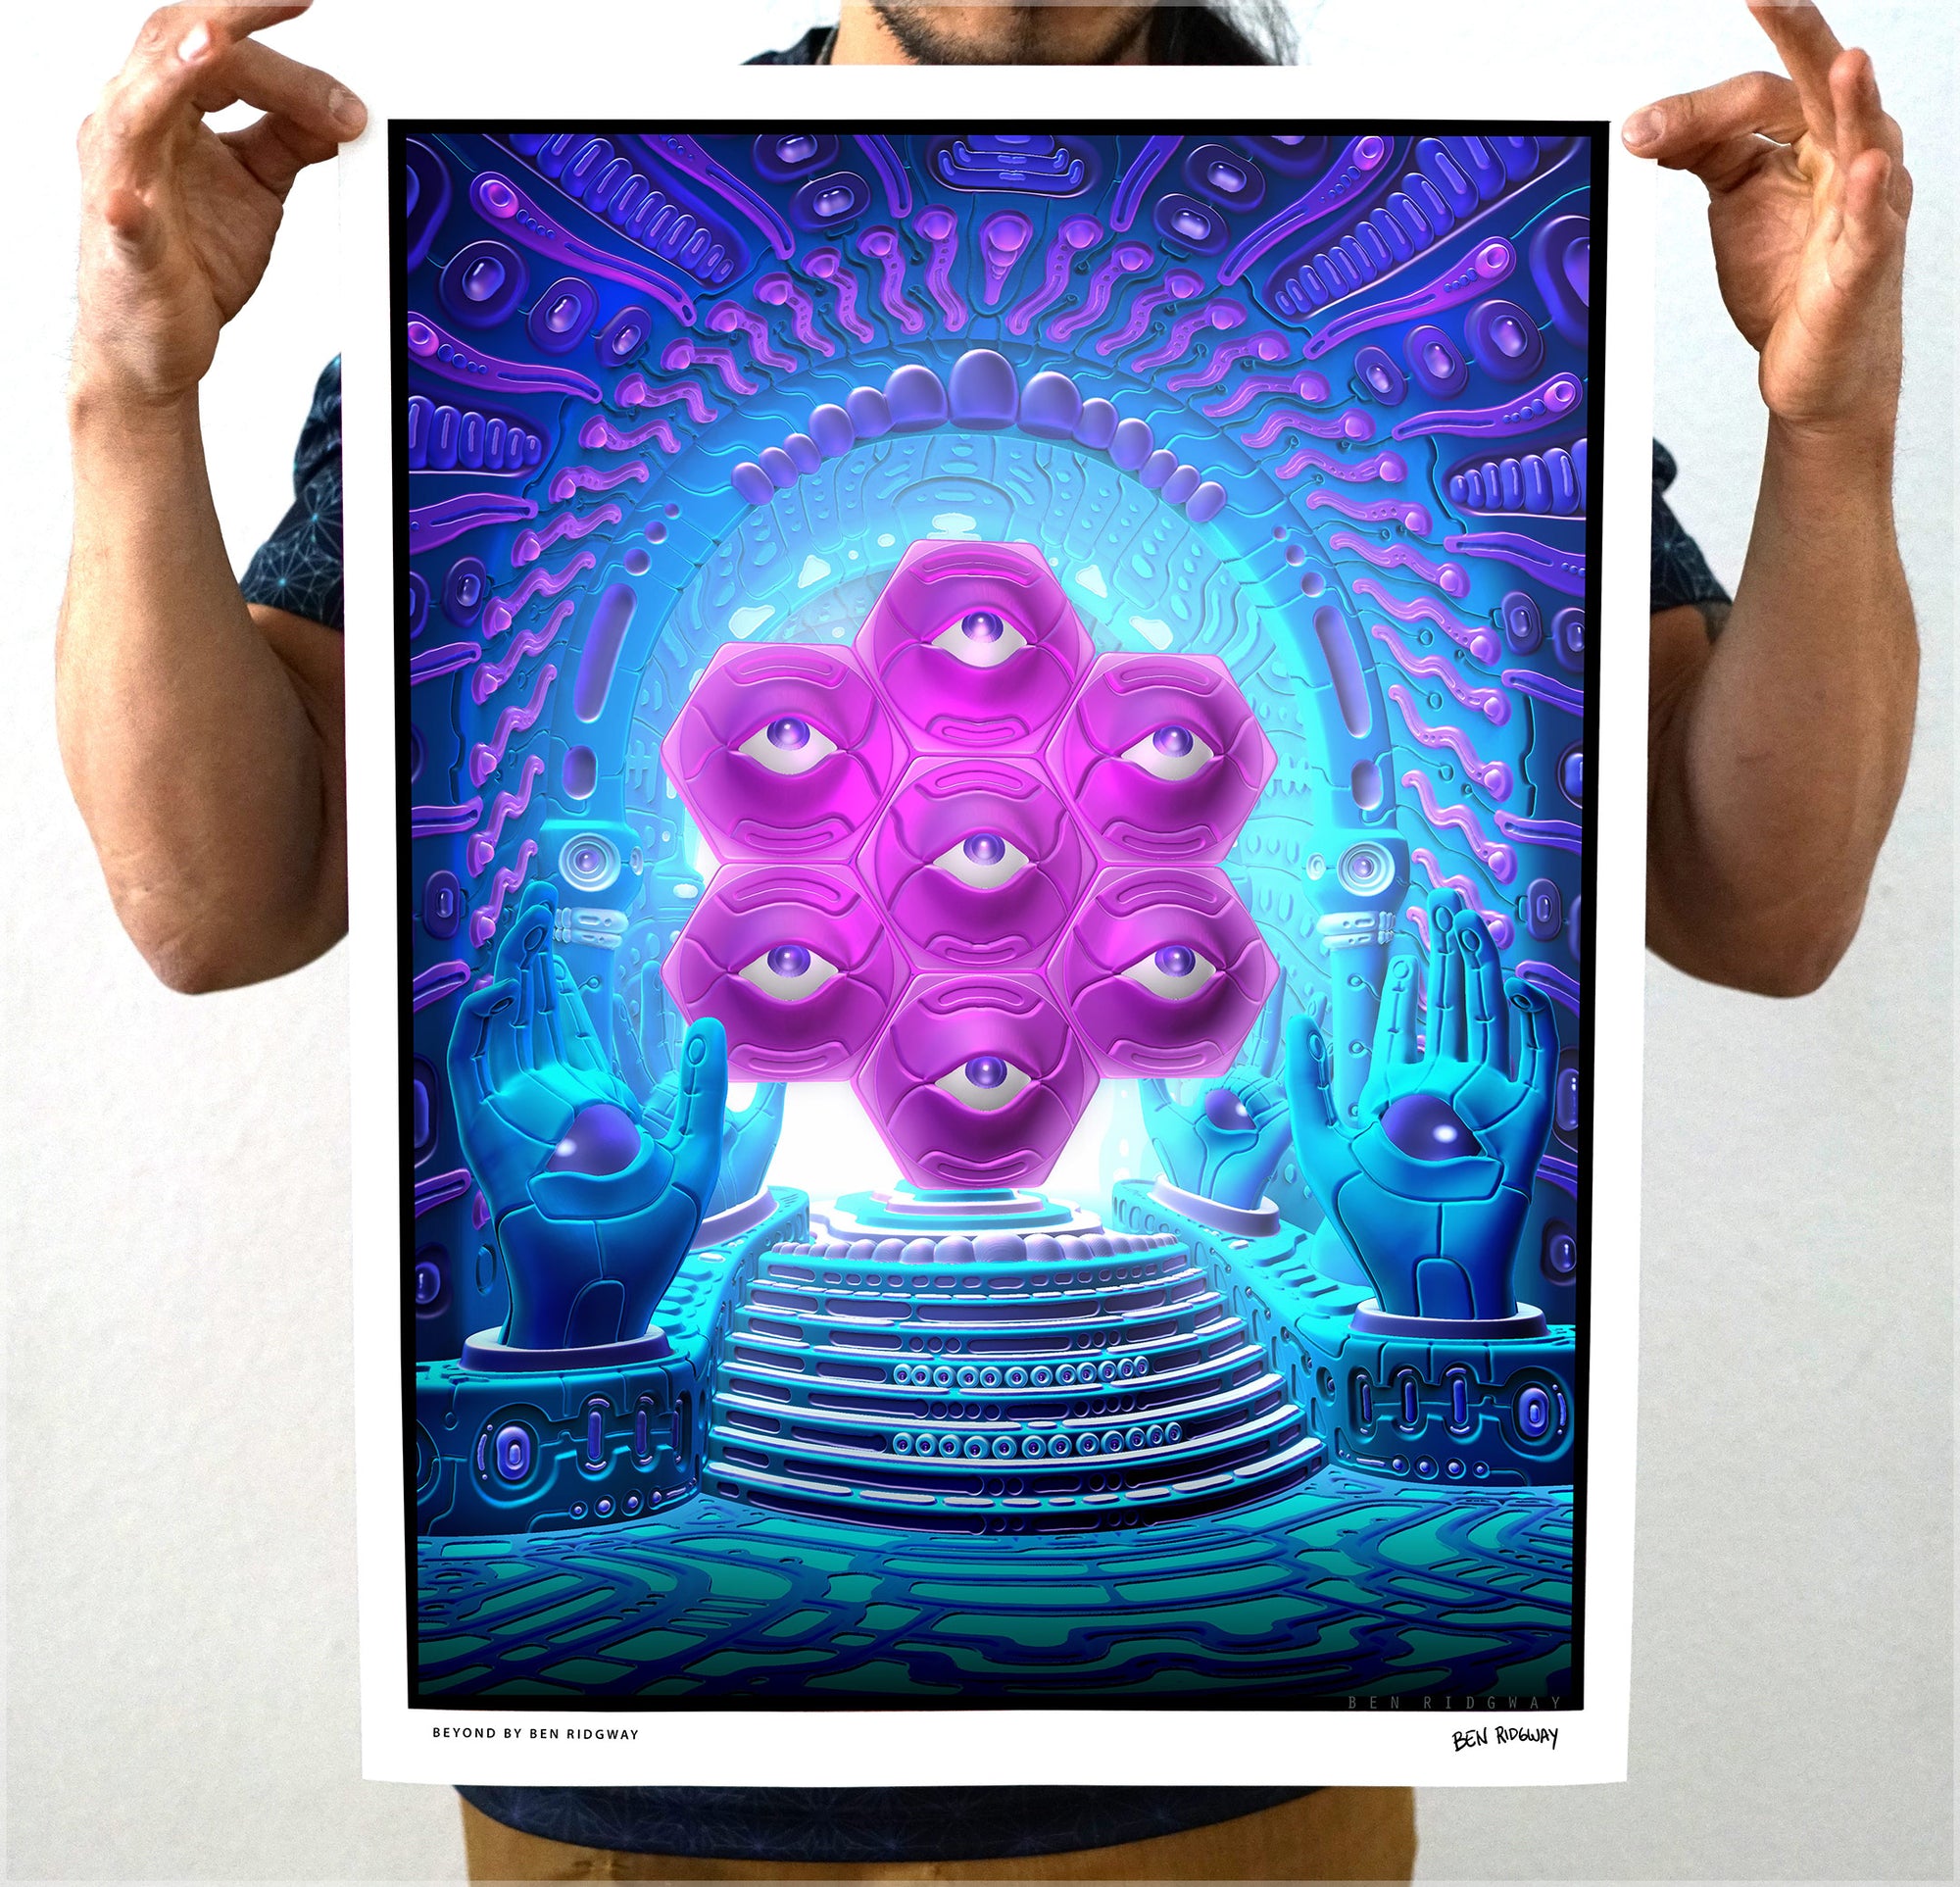 Beyond Signed Print by Ben Ridgway - 24 Hour Release